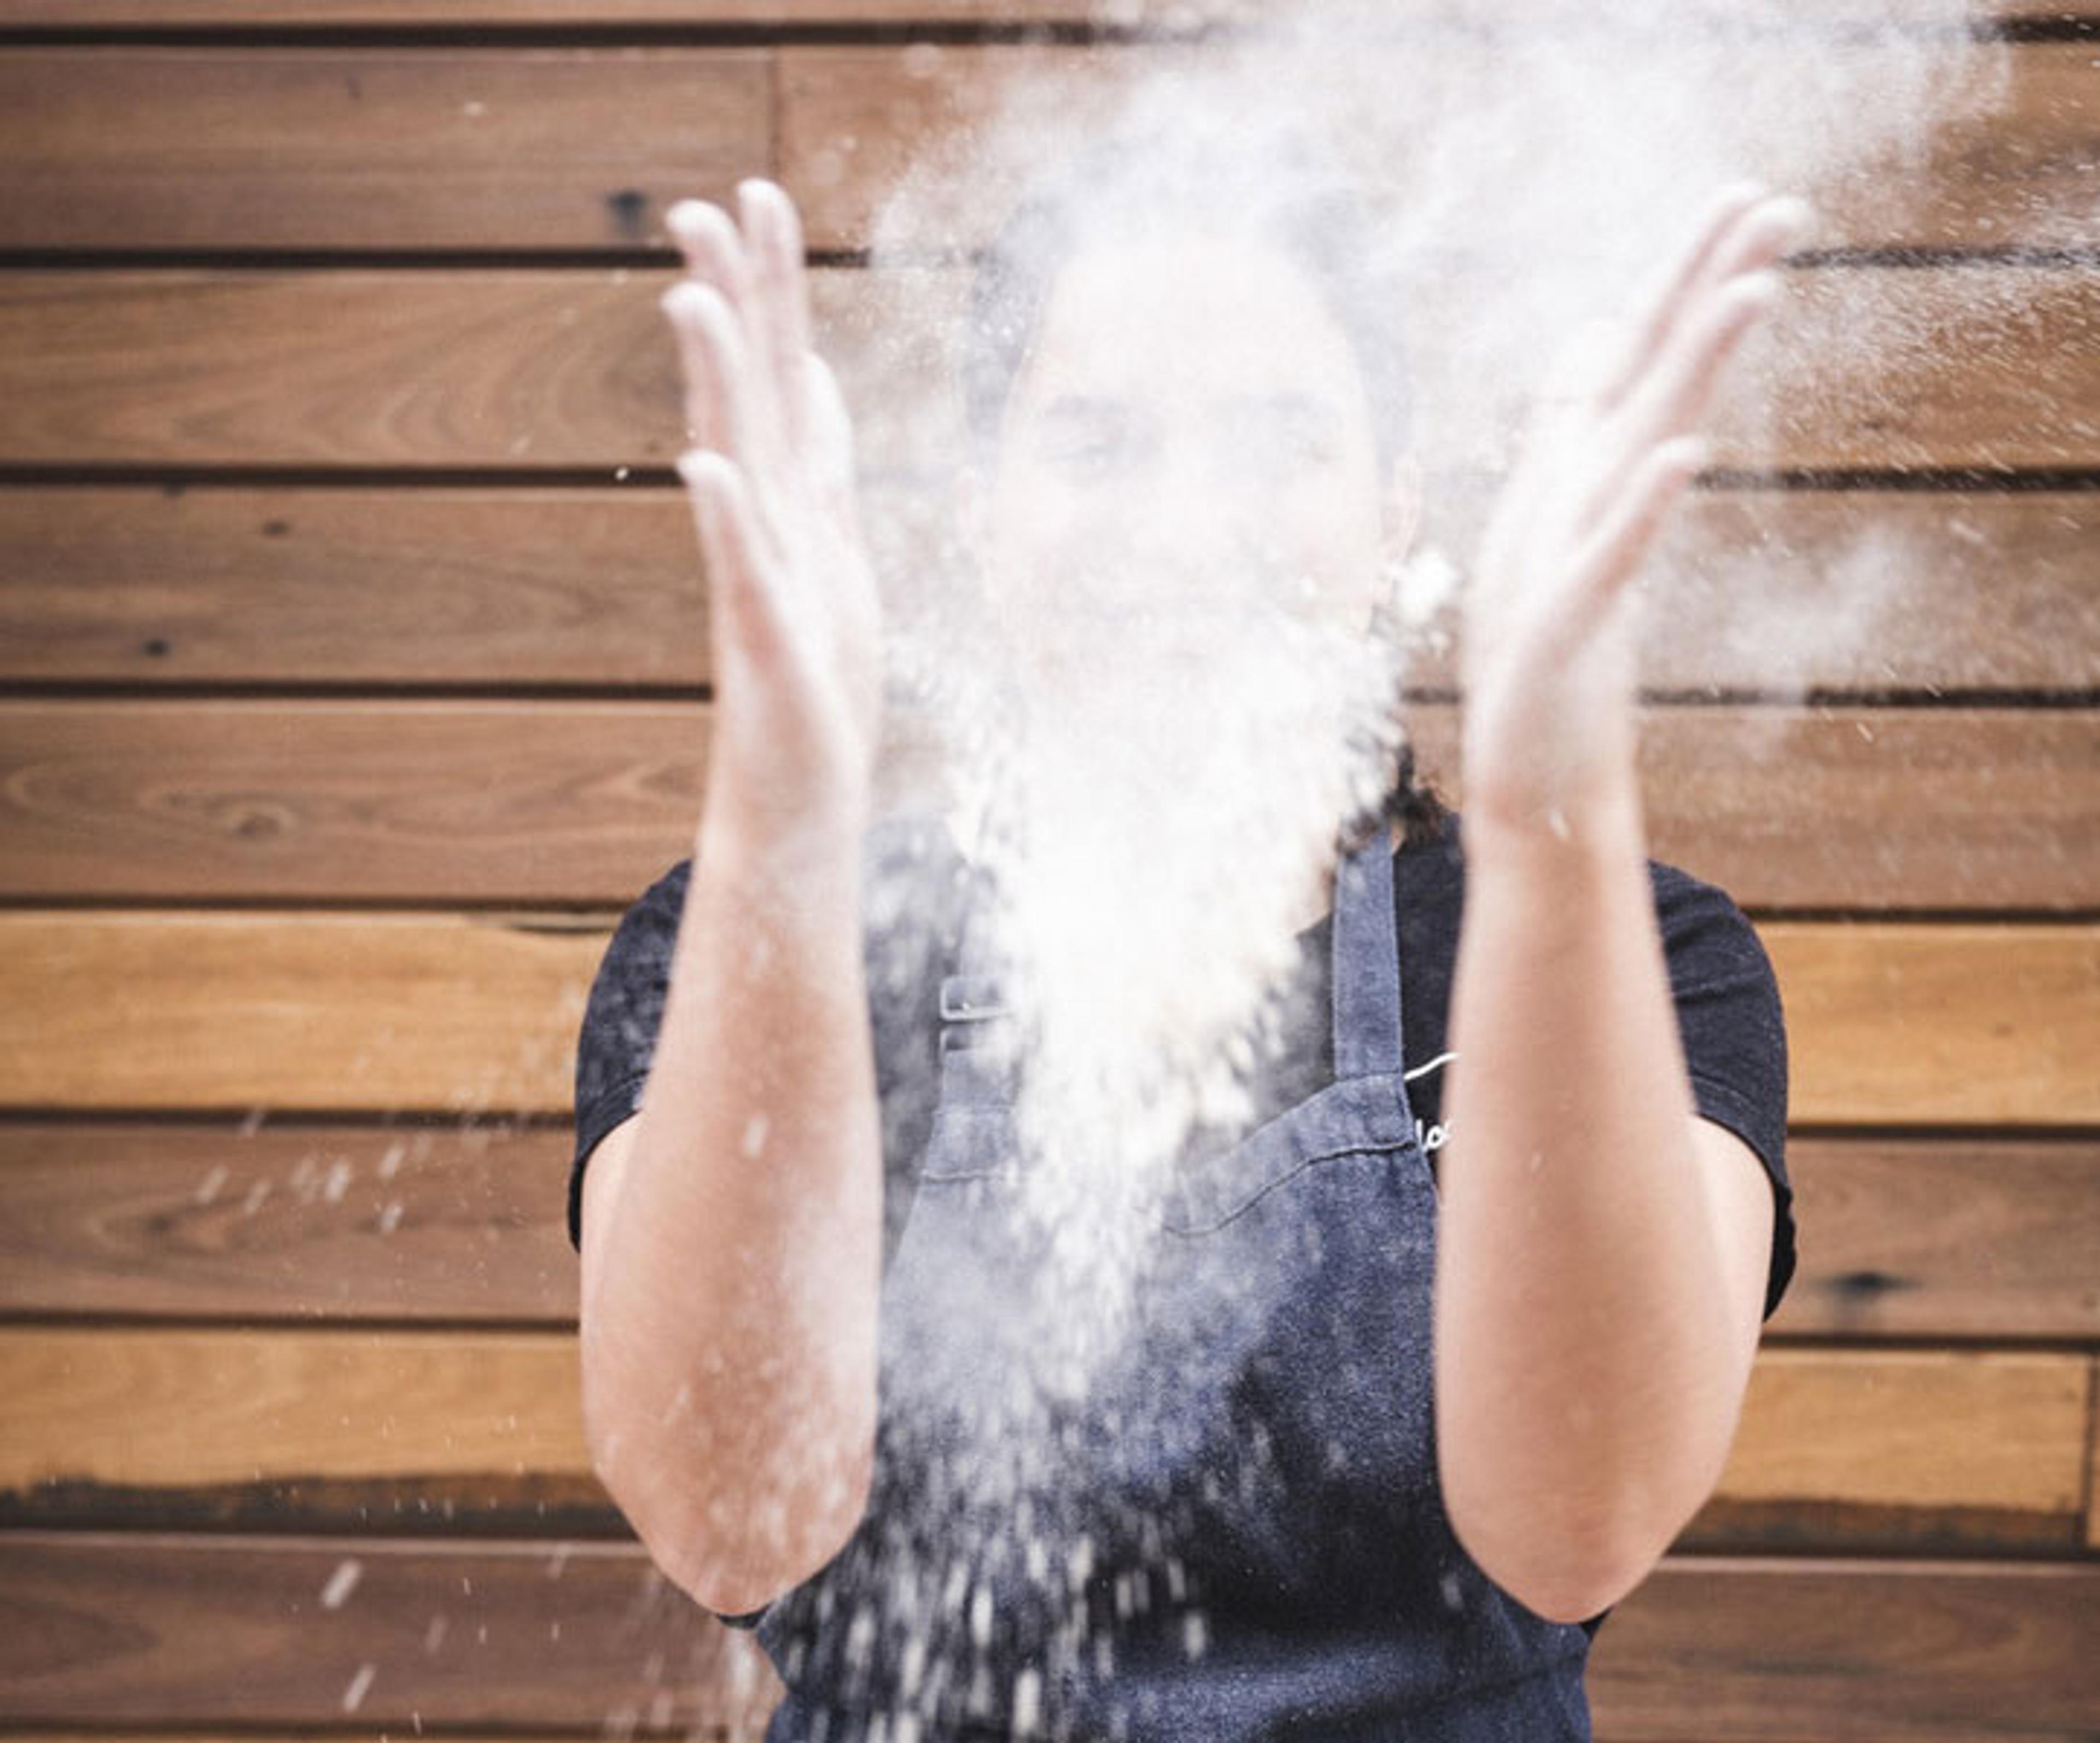 A person who has just thrown up a handful of flour and it has exploded in front of her face.